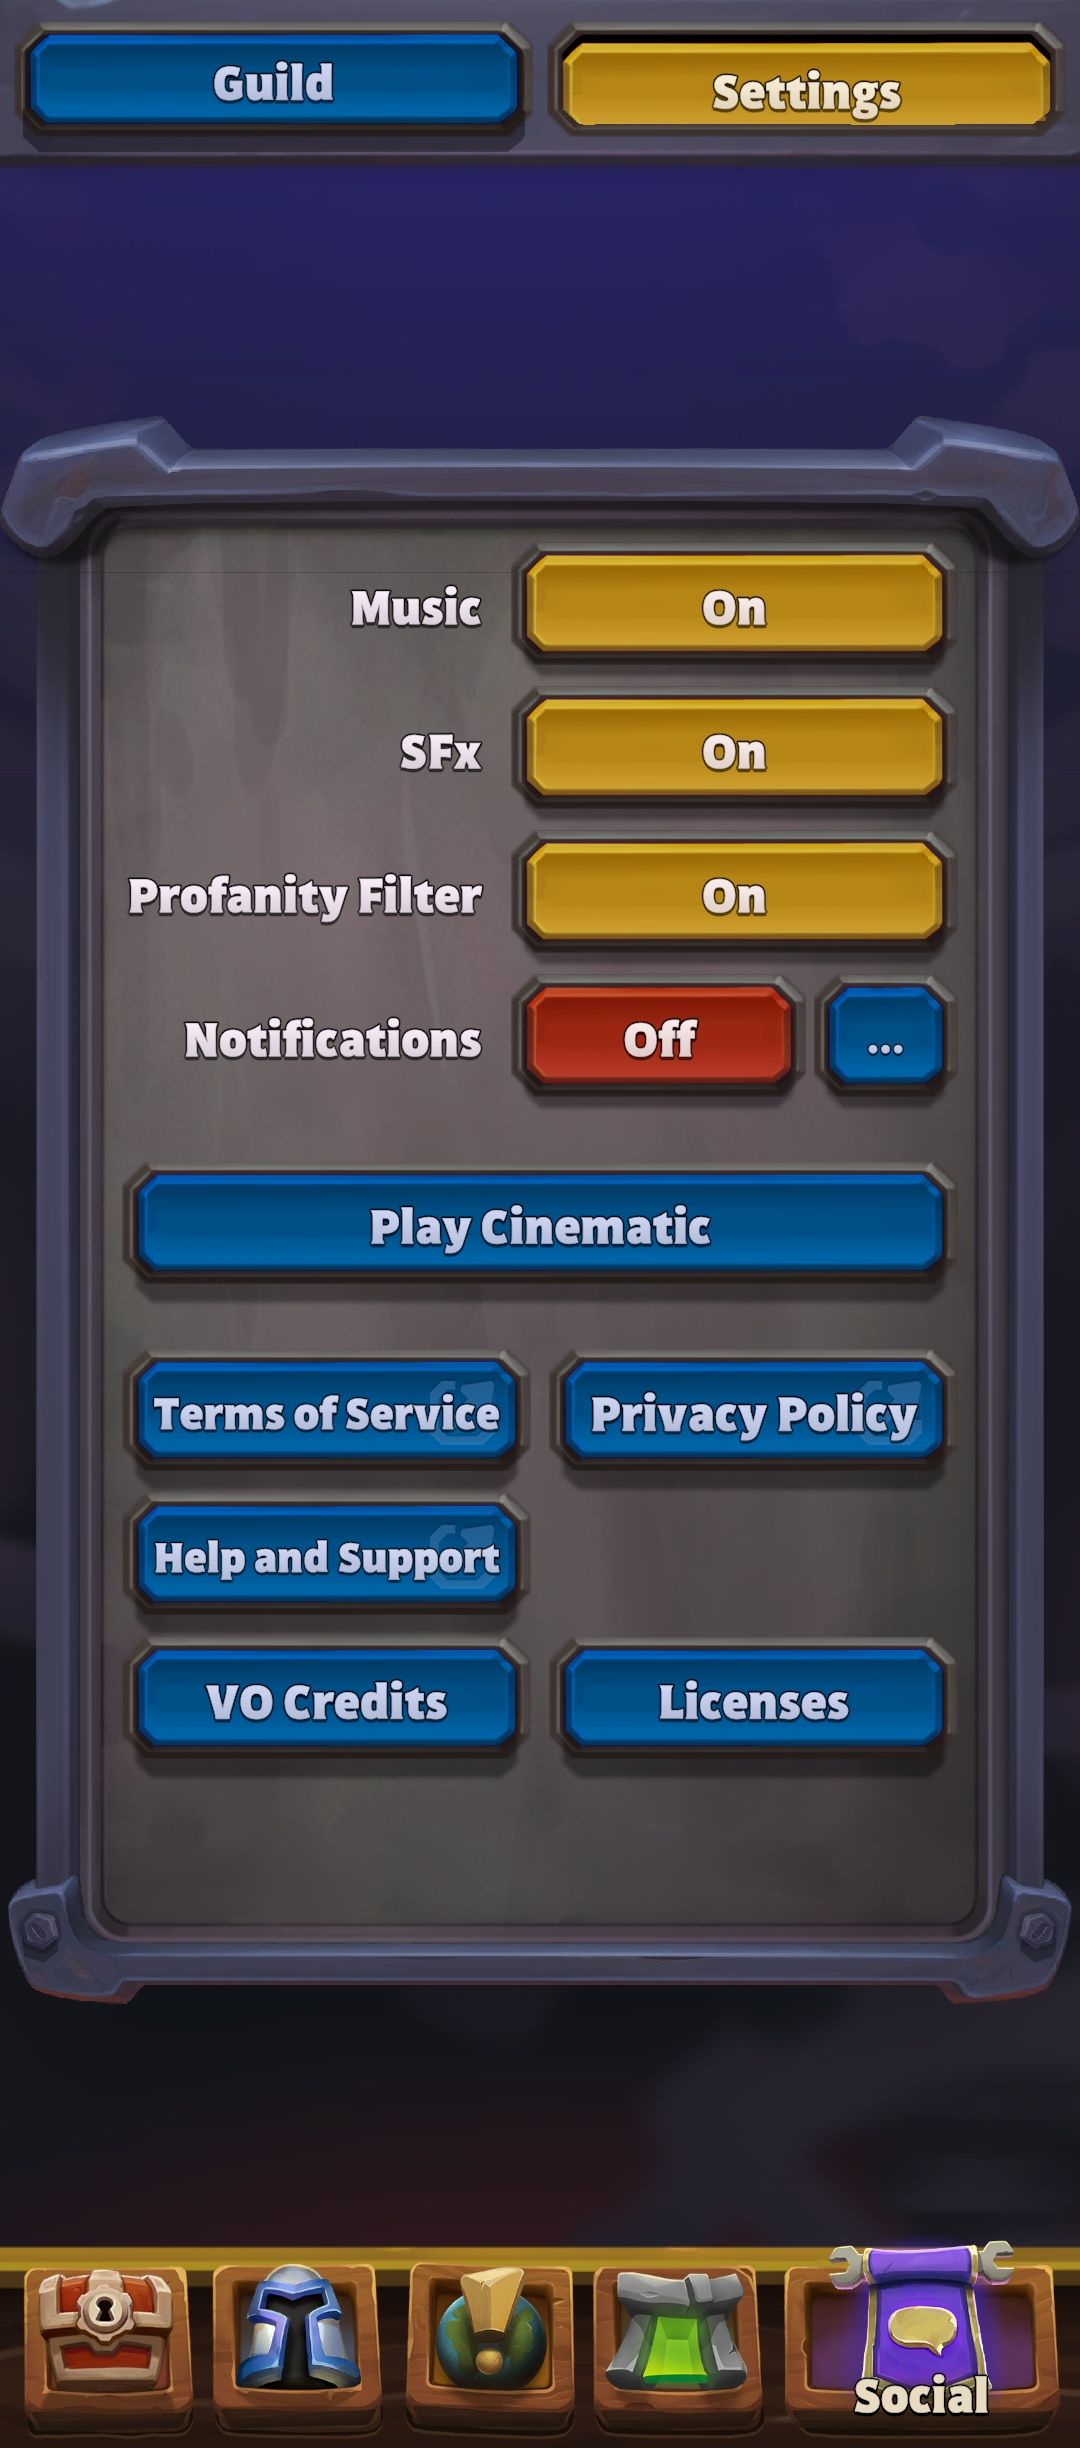 Warcraft Arclight Rumble Beta Hands-on Settings